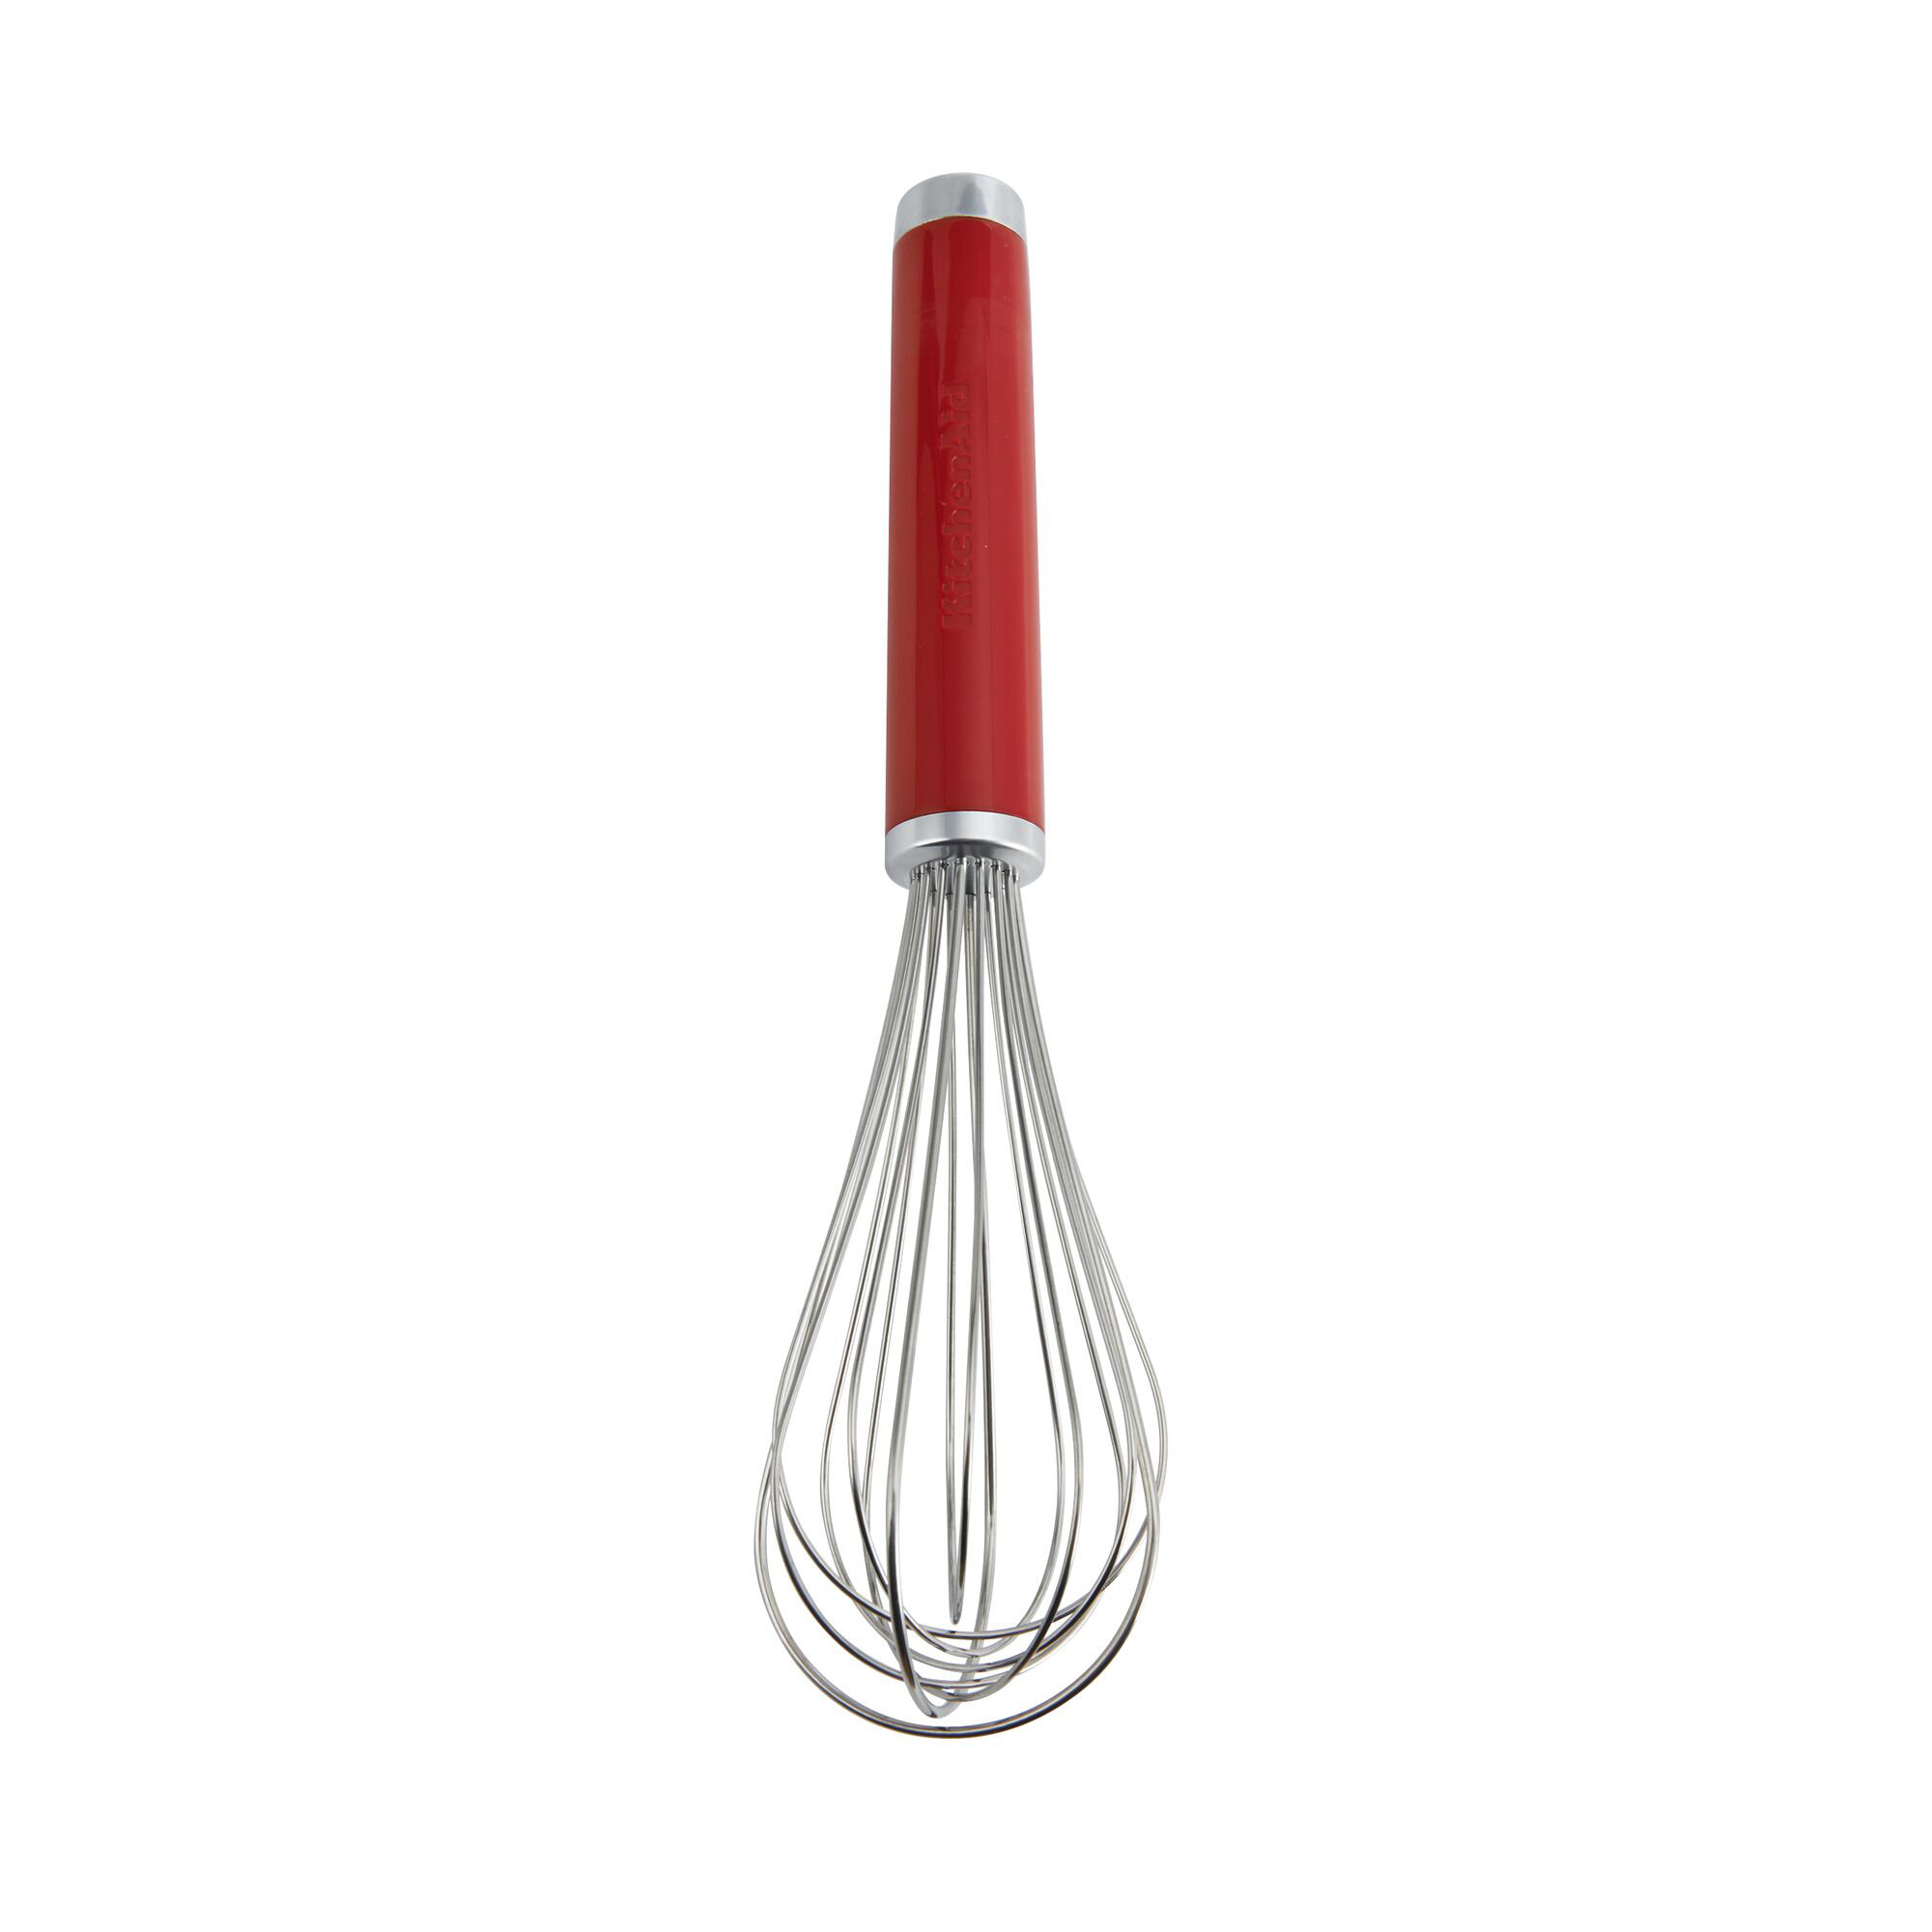 KitchenAid Classic Utility Whisk, 10.5-Inch, Red & Reviews